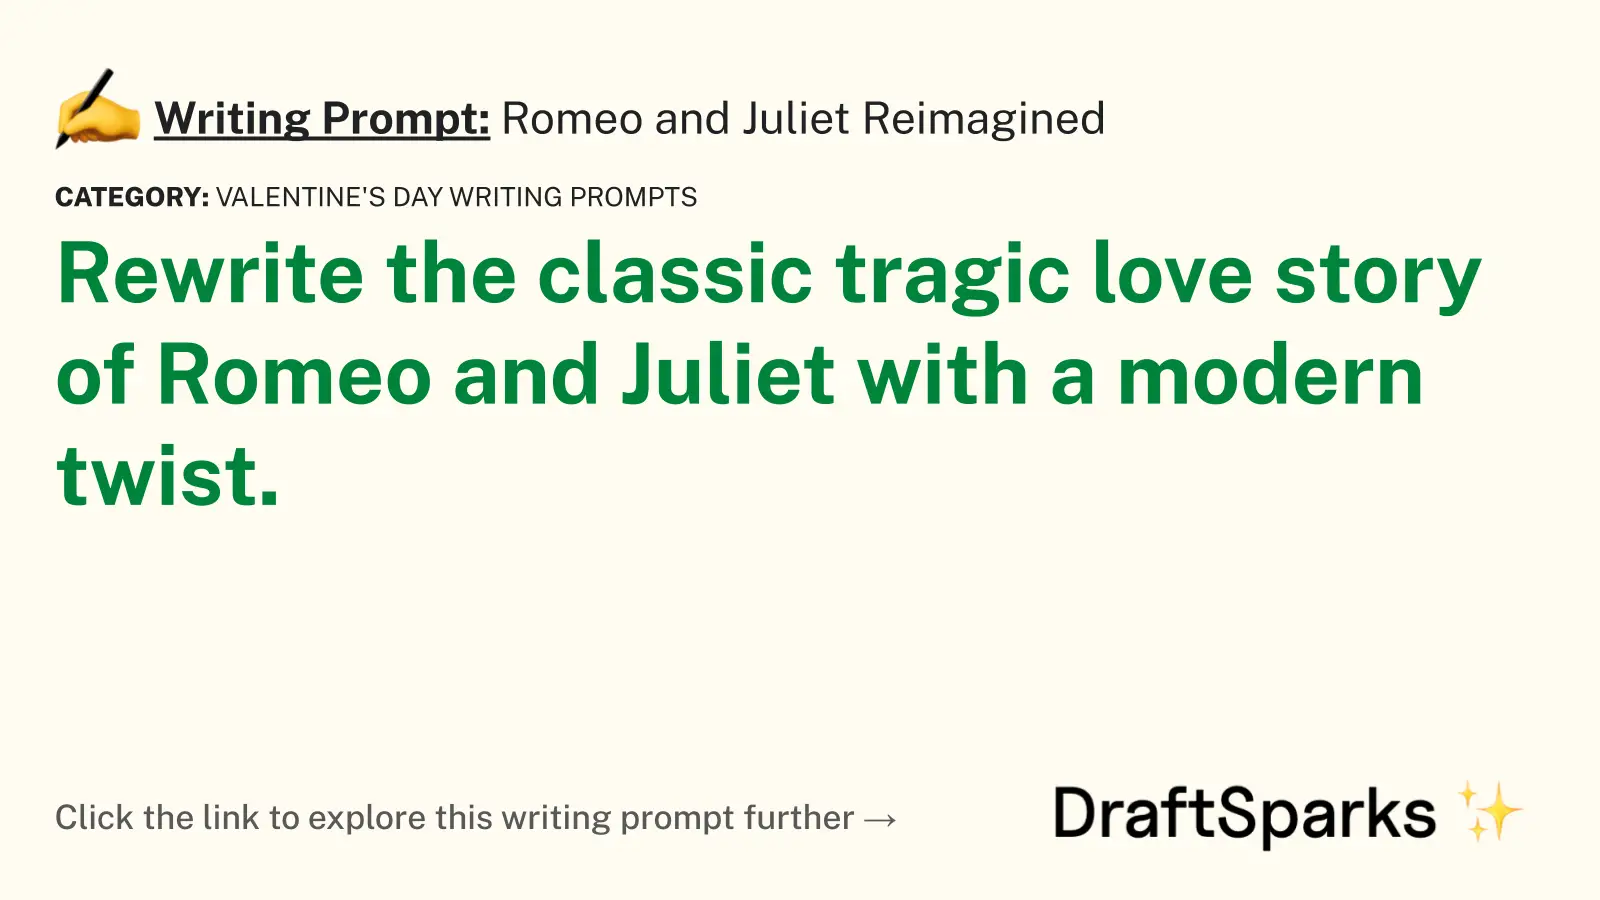 romeo and juliet creative writing prompt